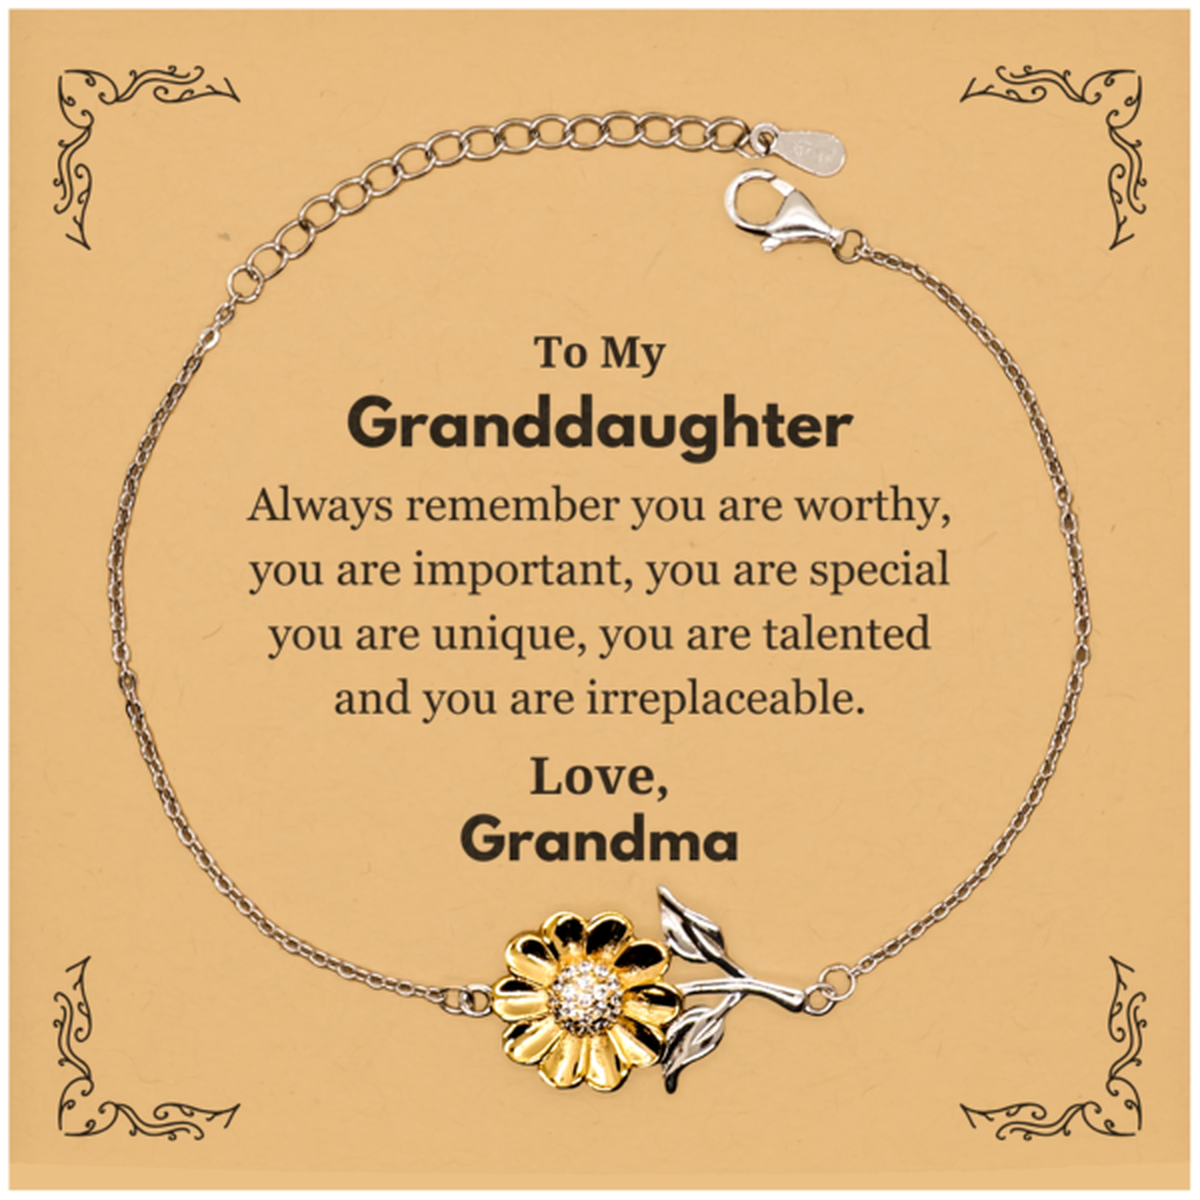 Granddaughter Birthday Gifts from Grandma, Inspirational Sunflower Bracelet for Granddaughter Christmas Graduation Gifts for Granddaughter Always remember you are worthy, you are important. Love, Grandma